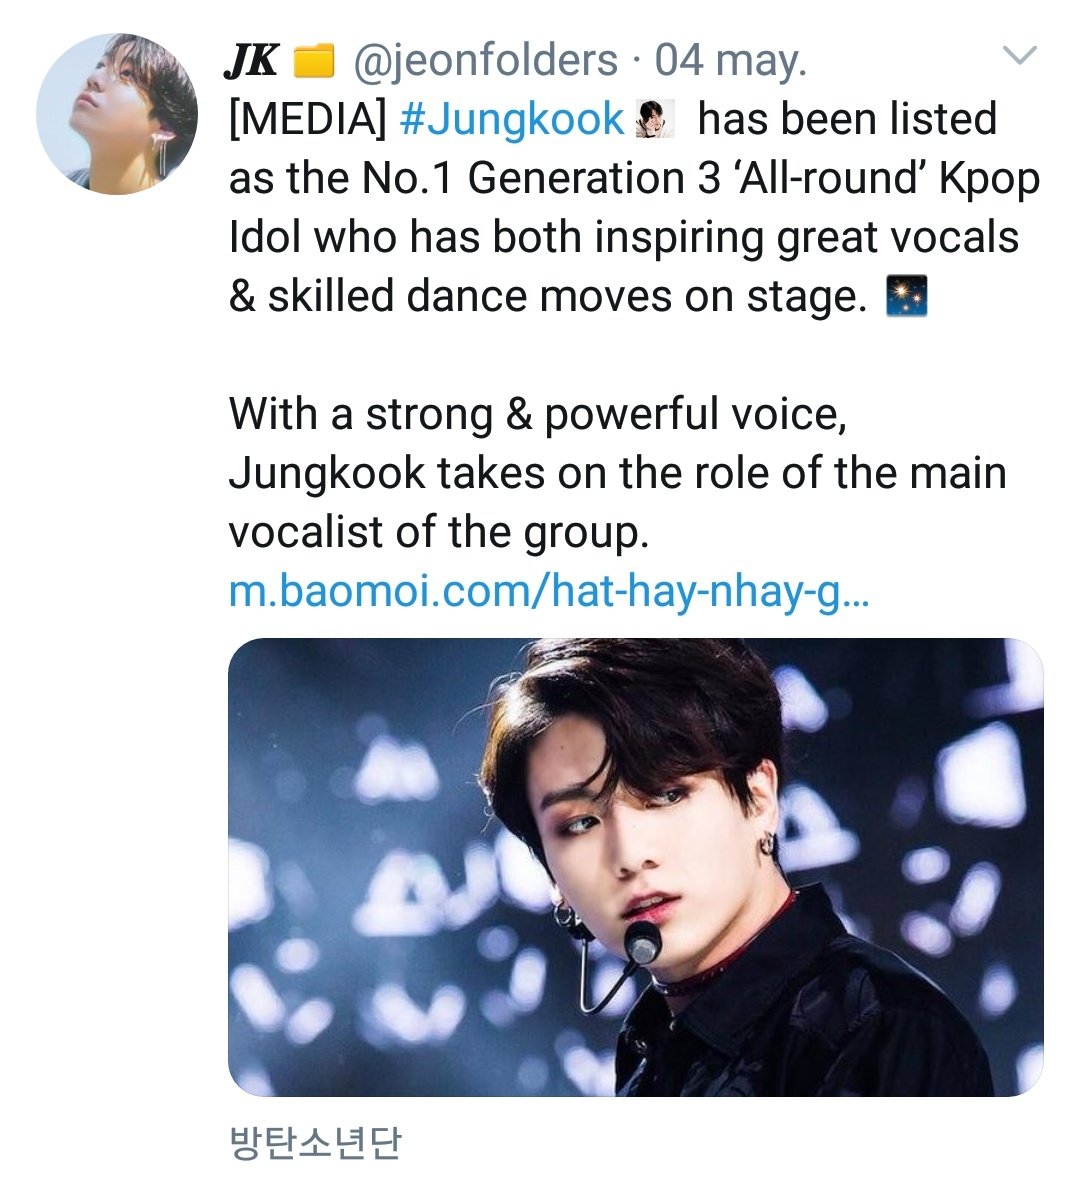 More of Jungkook being ranked as one of the best singers and all-rounders in the industry "he has solid abilities and is able to express his vocal in performances that require high technical skills"